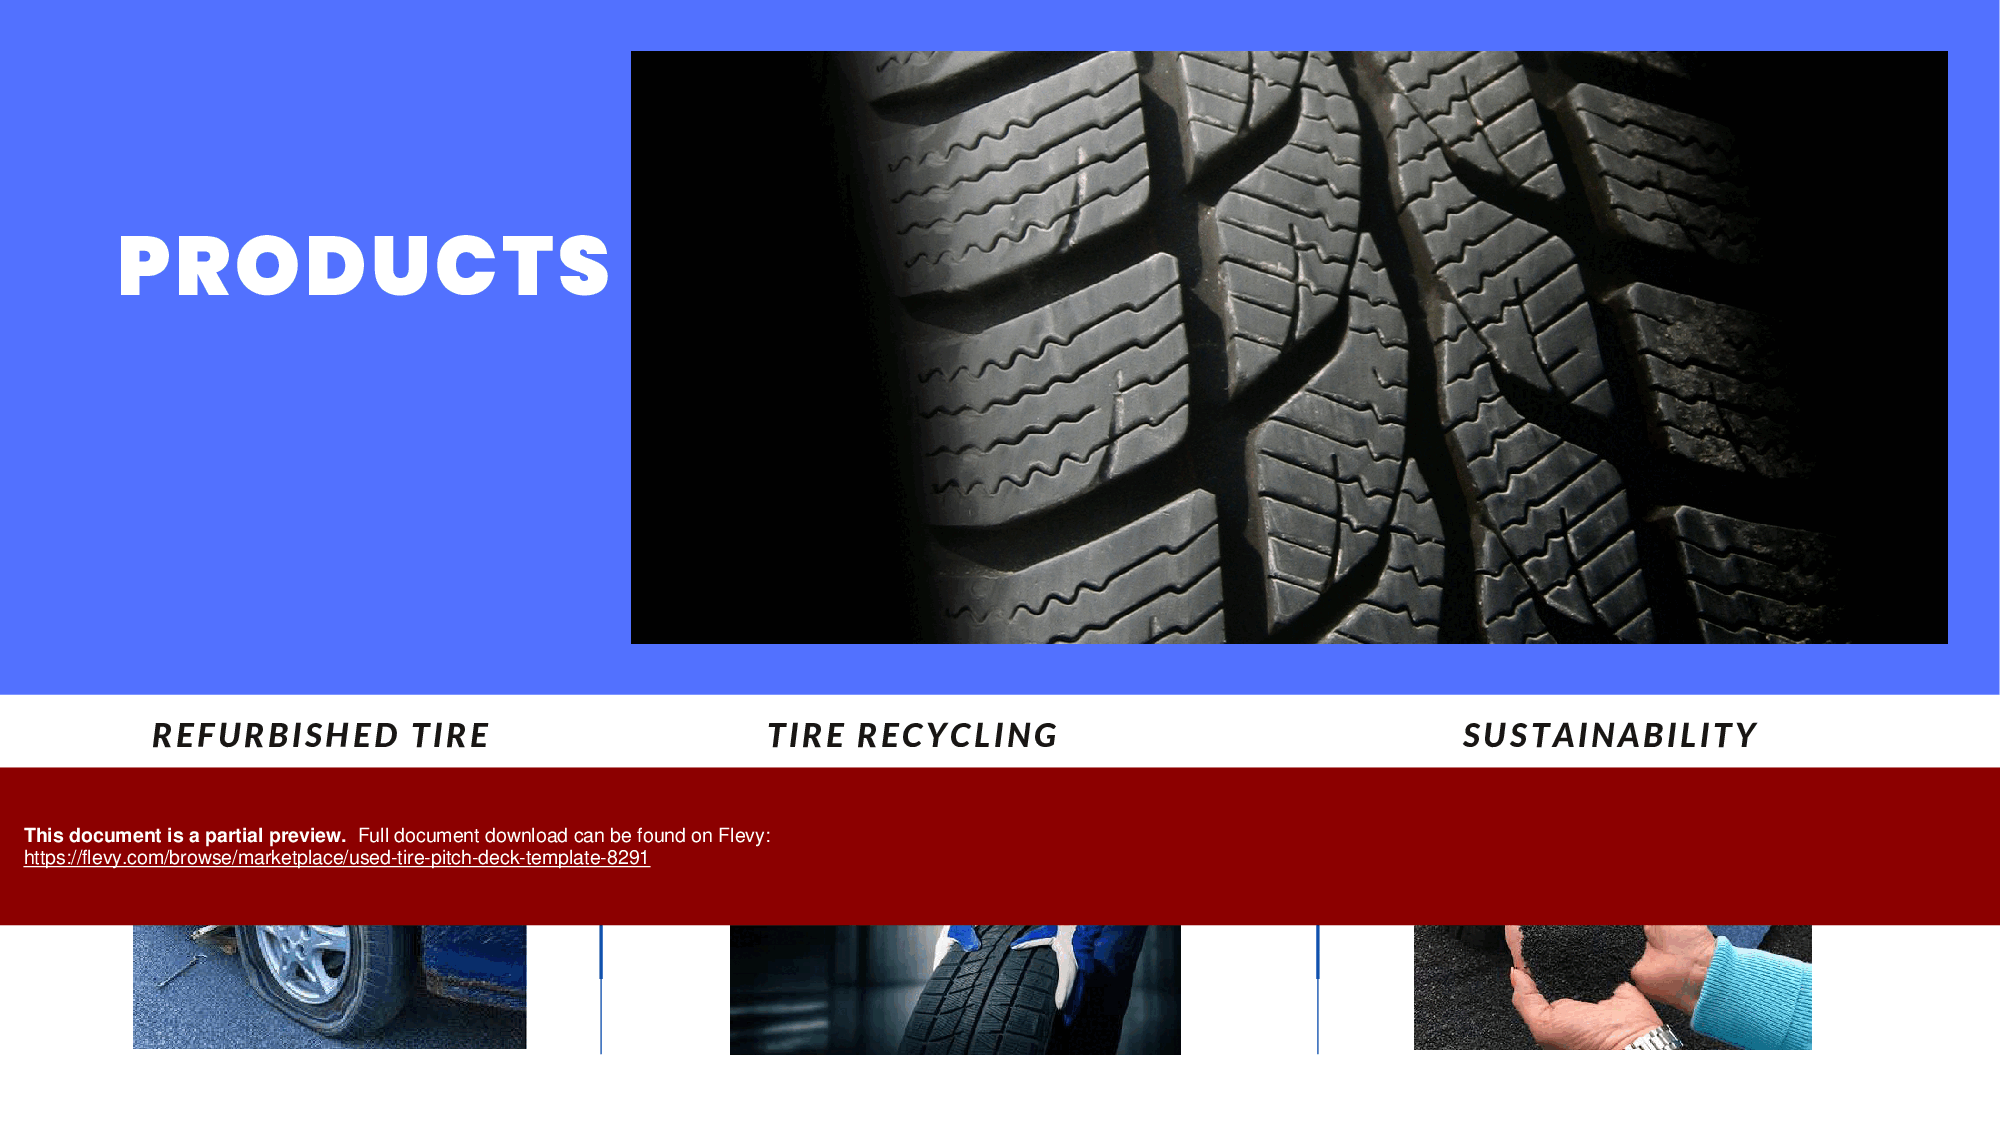 Used Tire Pitch Deck Template (32-page PDF document) Preview Image